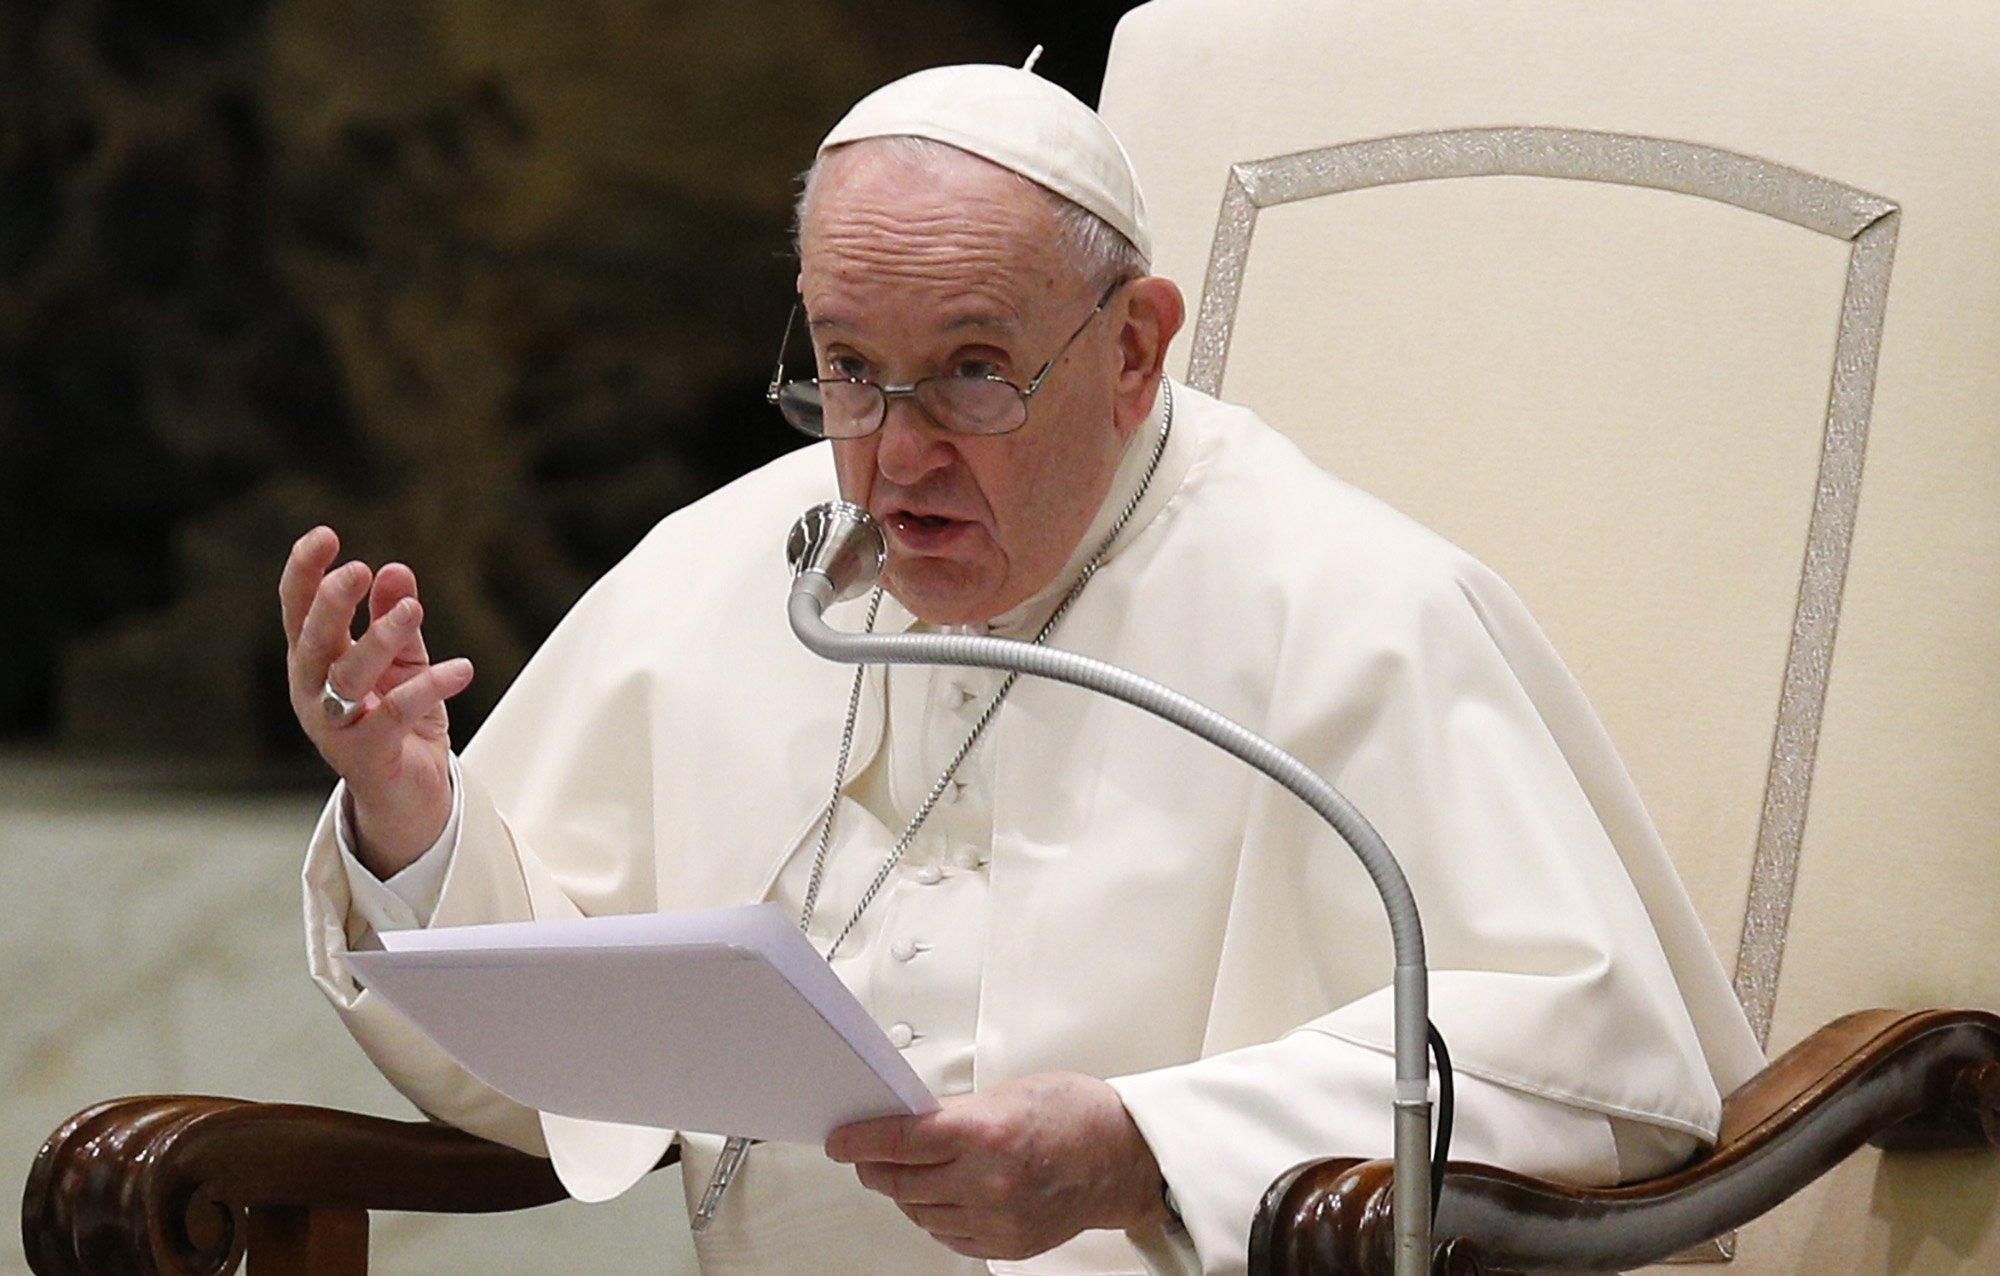 Synod is not aiming for parliament-style consensus, says Pope